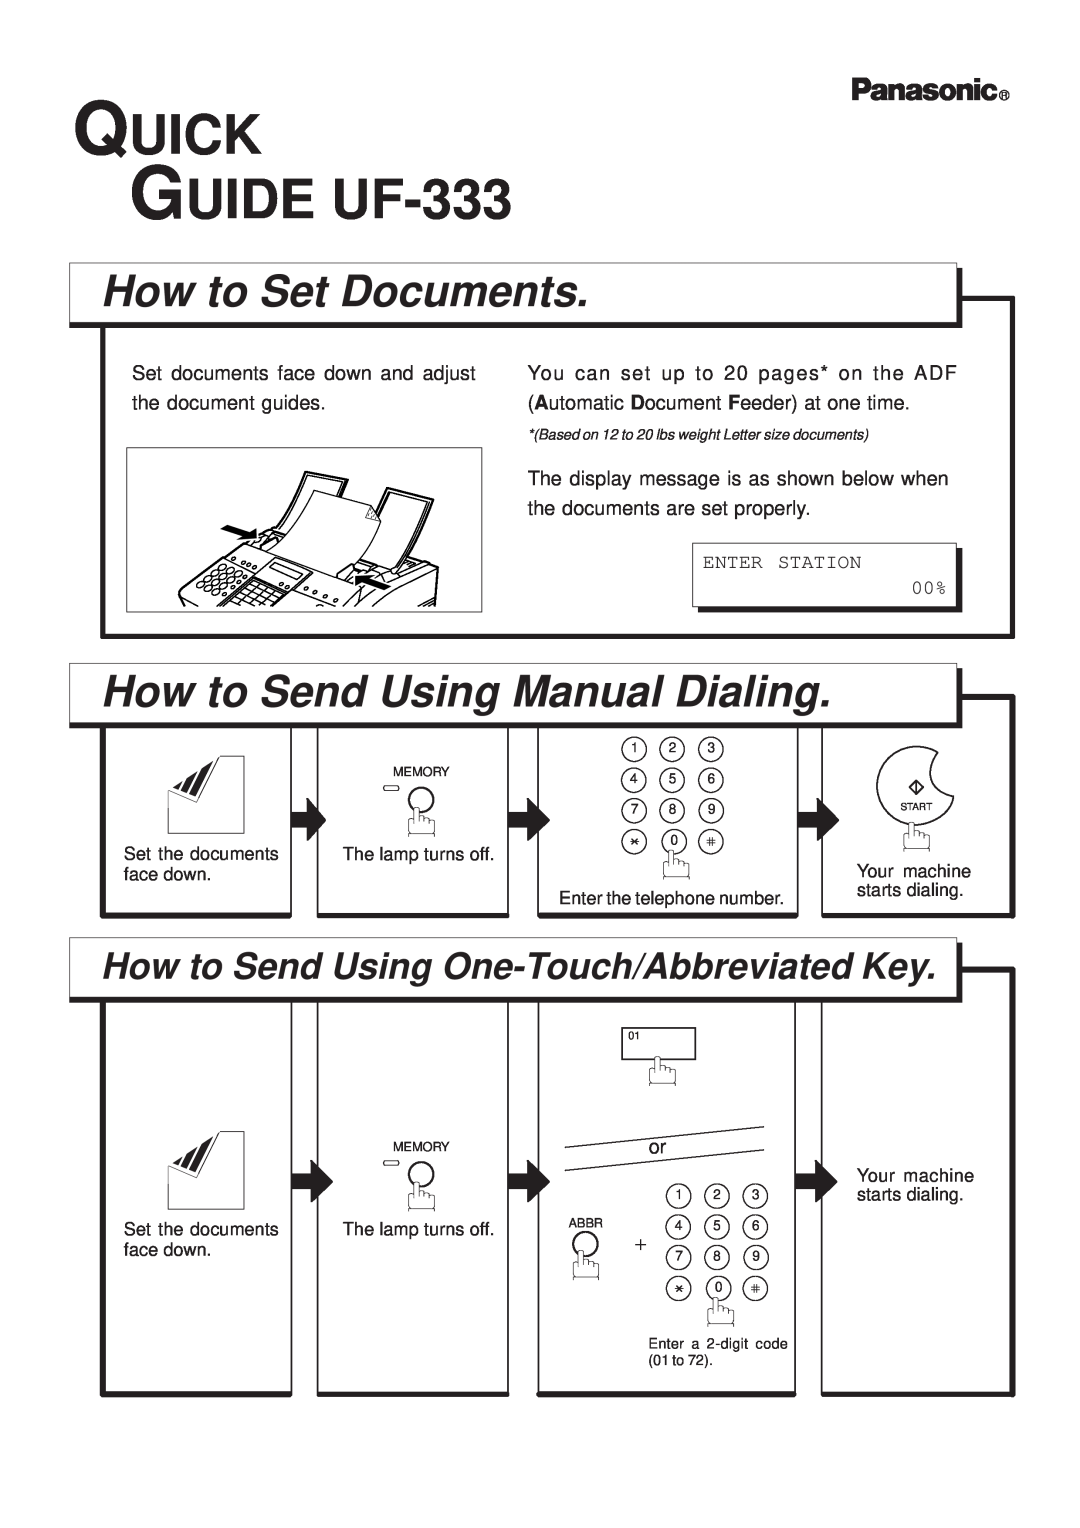 Panasonic manual QUICK GUIDE UF-333, How to Set Documents, How to Send Using Manual Dialing 